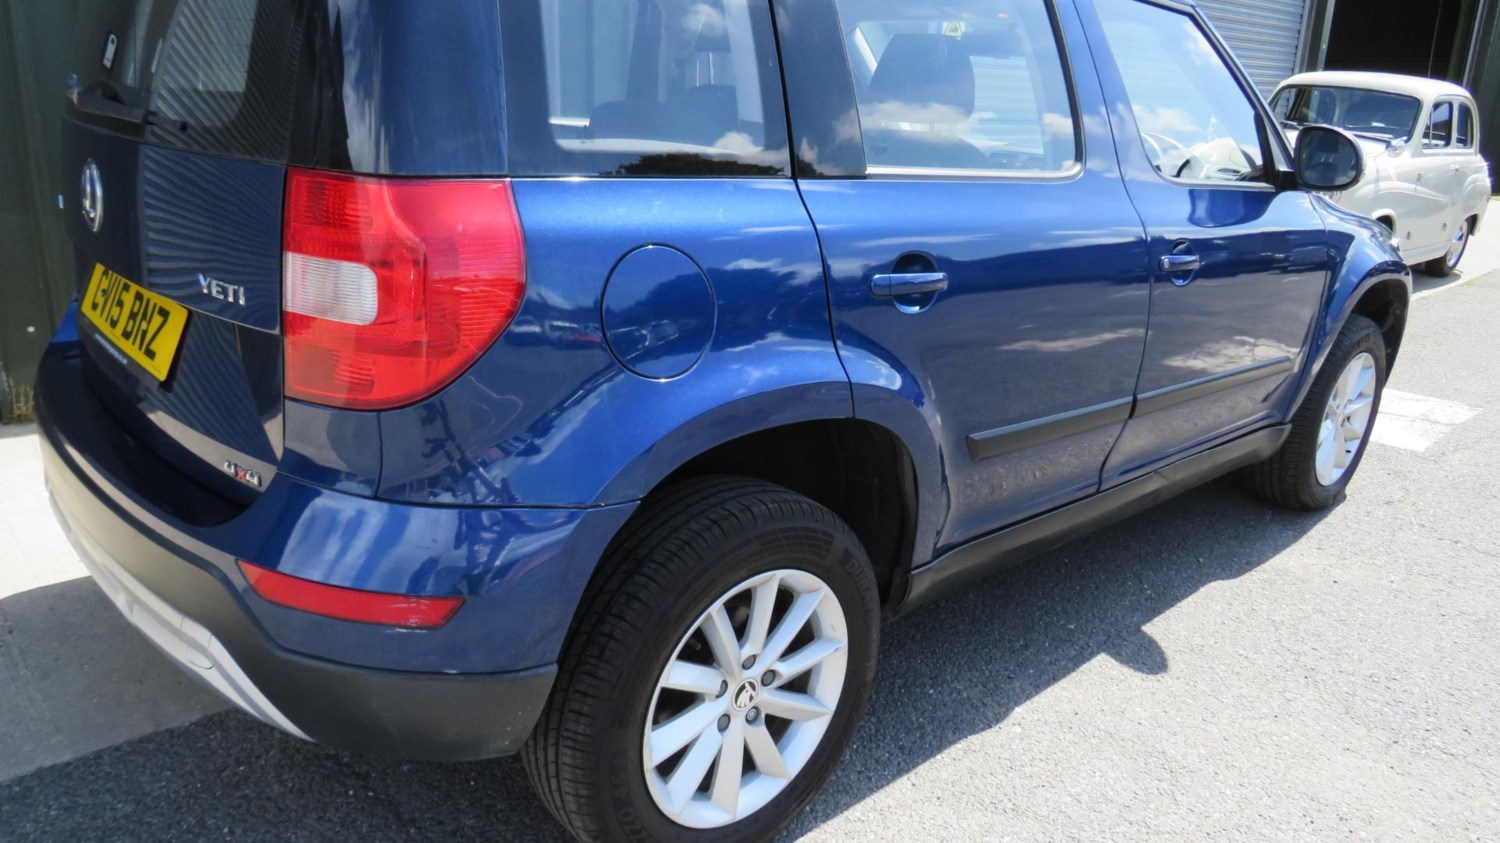 2015 (15) Skoda Yeti Outdoor 2.0 TDI CR S 4x4 5 DOOR PART EXCHANGE TO CLEAR For Sale In Bashley, Hampshire